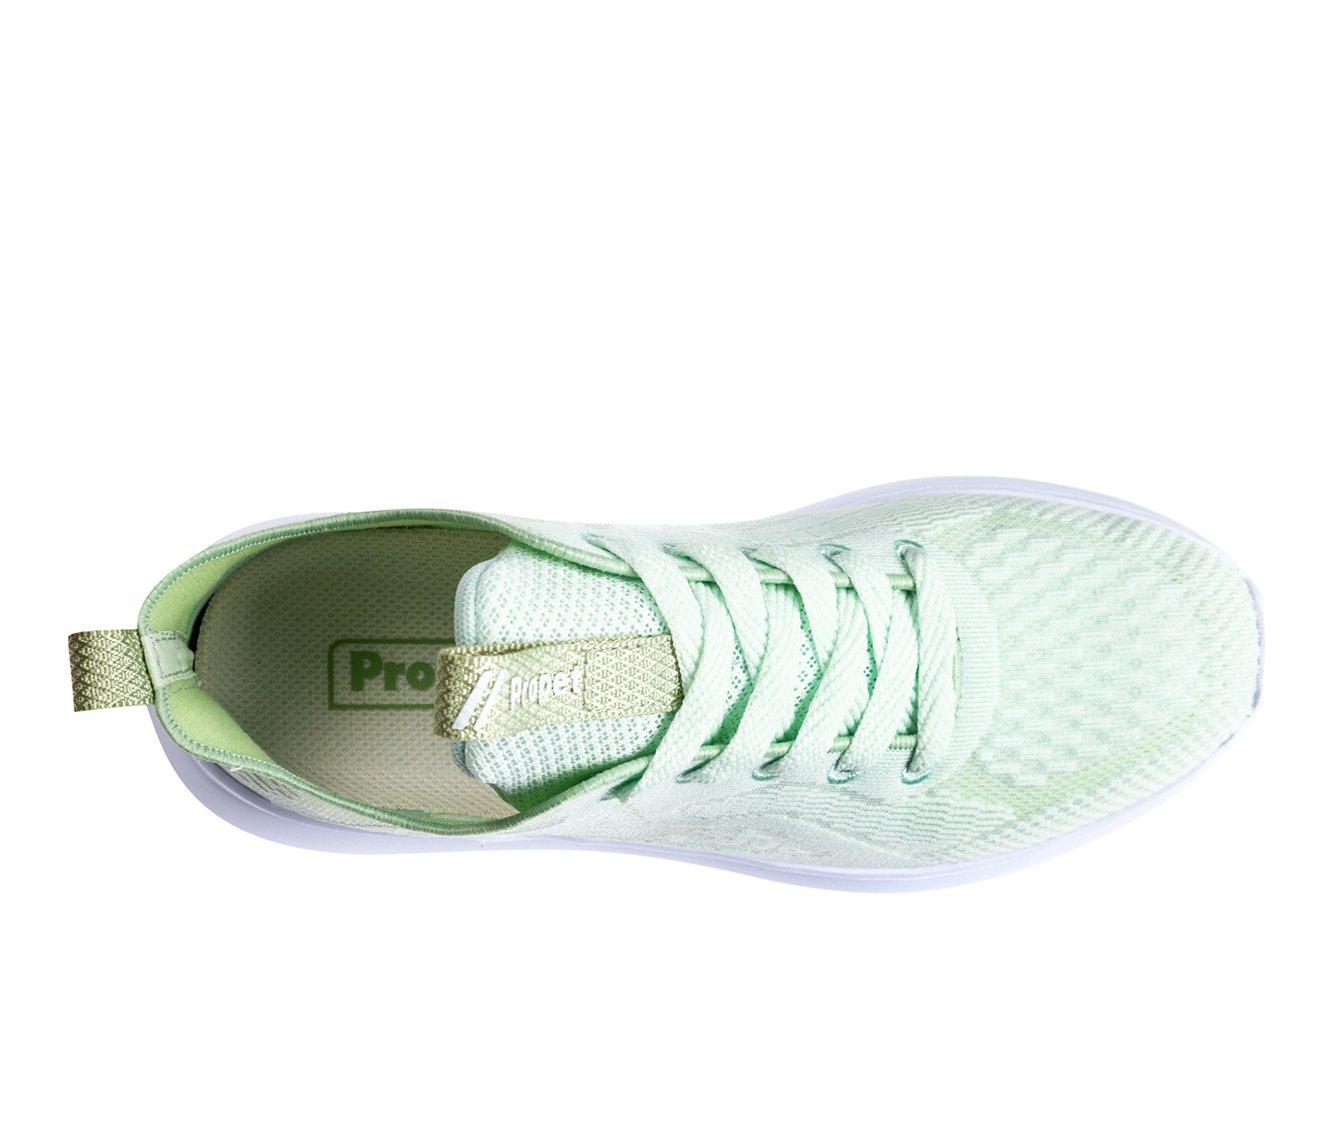 Women's Propet TravelBound Spright Sneakers